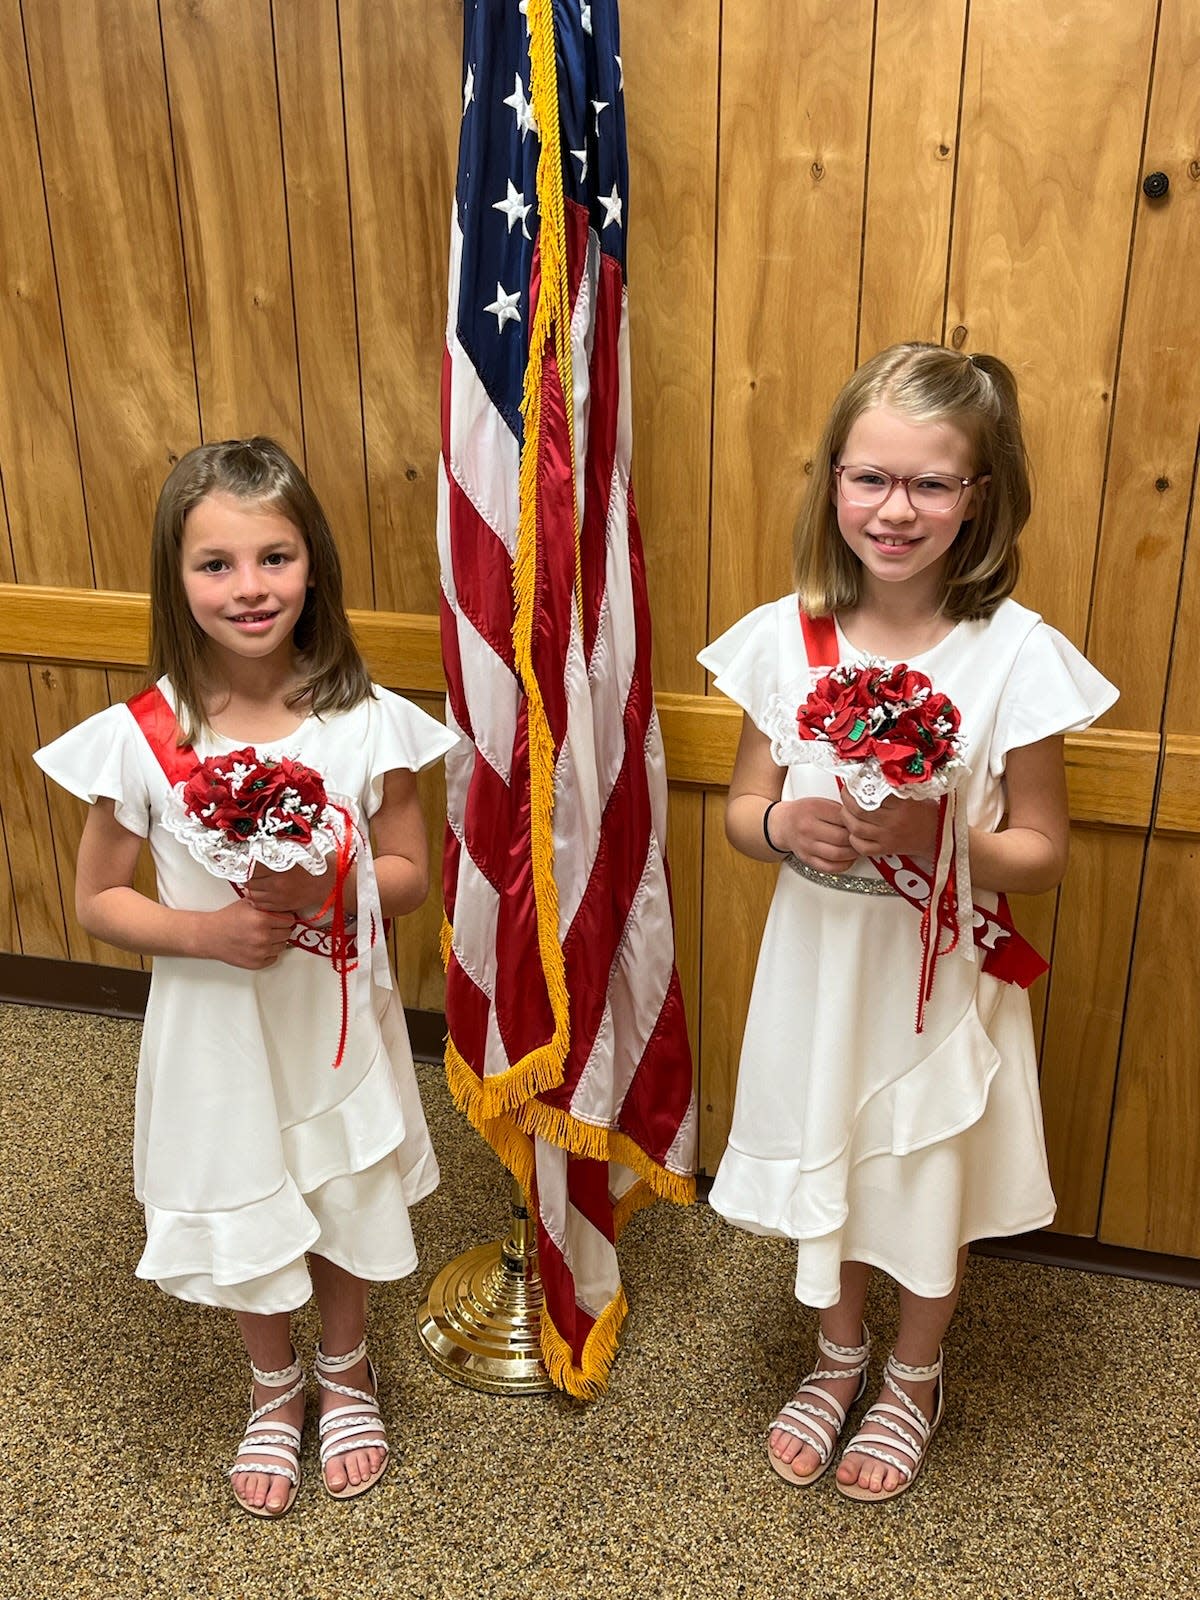 Representing Harry Higgins Post 88 of the American Legion as poppy girls are Little Miss Poppy Abigail Valentine and Miss Poppy Rosemary Valentine. Parents are Ben and Toni Valentine of Wooster and grandparents are Stan and Sally Valentine of Ashland. Abigail, 6, is in first grade at Norwayne Local Schools. Rosemary, 9,  is in the fourth grade at Norwayne Local Schools. They will be riding in the City of Ashland Memorial Day parade and placing poppy bouquets at the veterans memorial during the service at Ashland Cemetery.